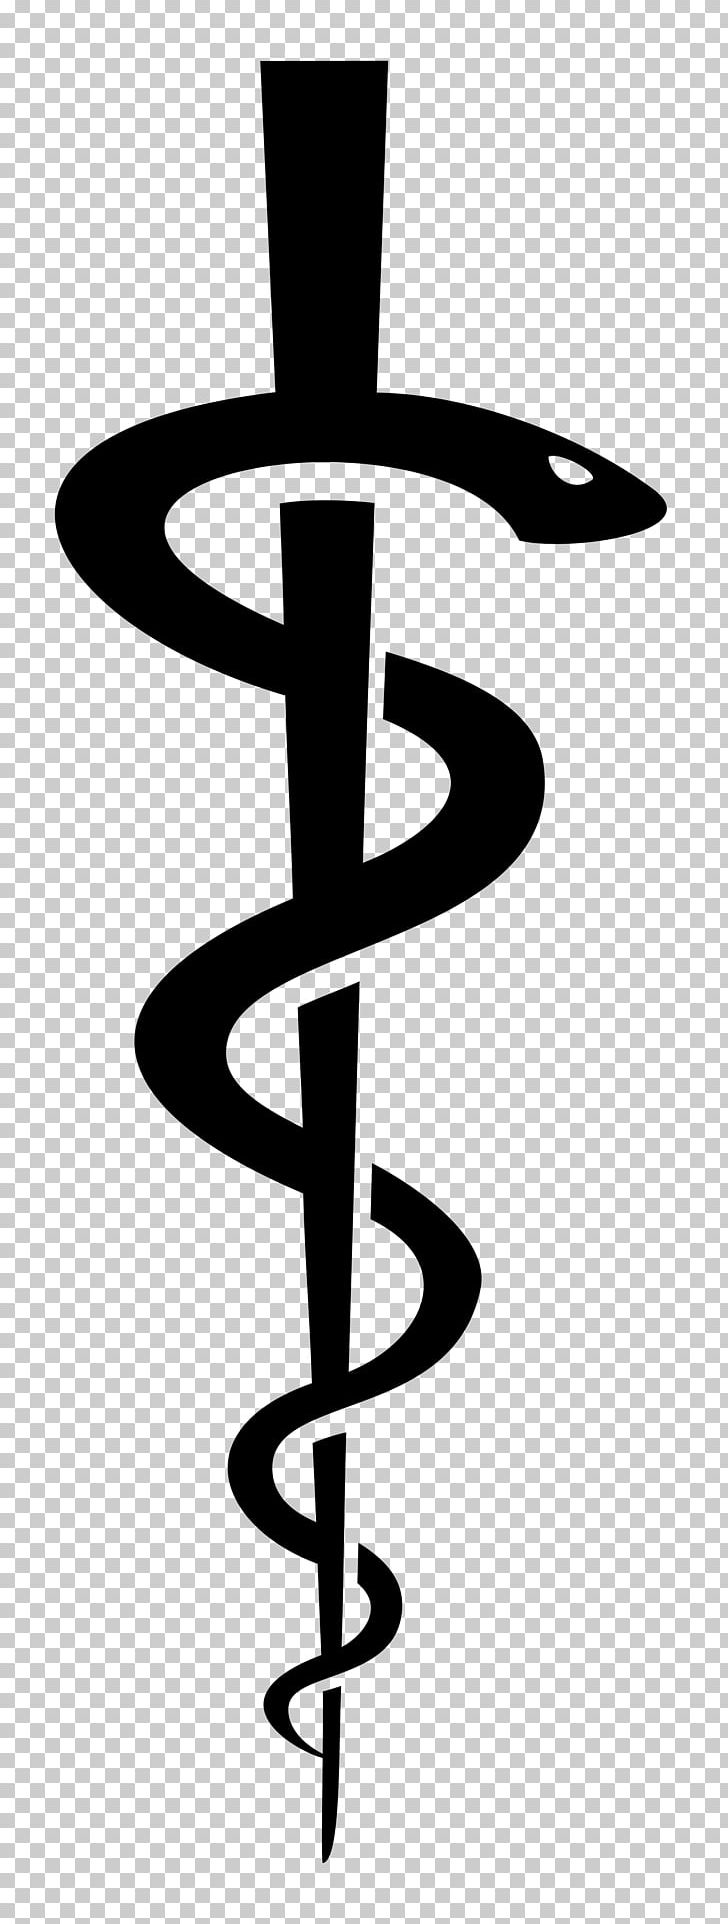 Rod Of Asclepius Staff Of Hermes Caduceus As A Symbol Of Medicine Oral And Maxillofacial Surgery PNG, Clipart, Asclepius, Black And White, Caduceus As A Symbol Of Medicine, Dental Degree, Dentistry Free PNG Download